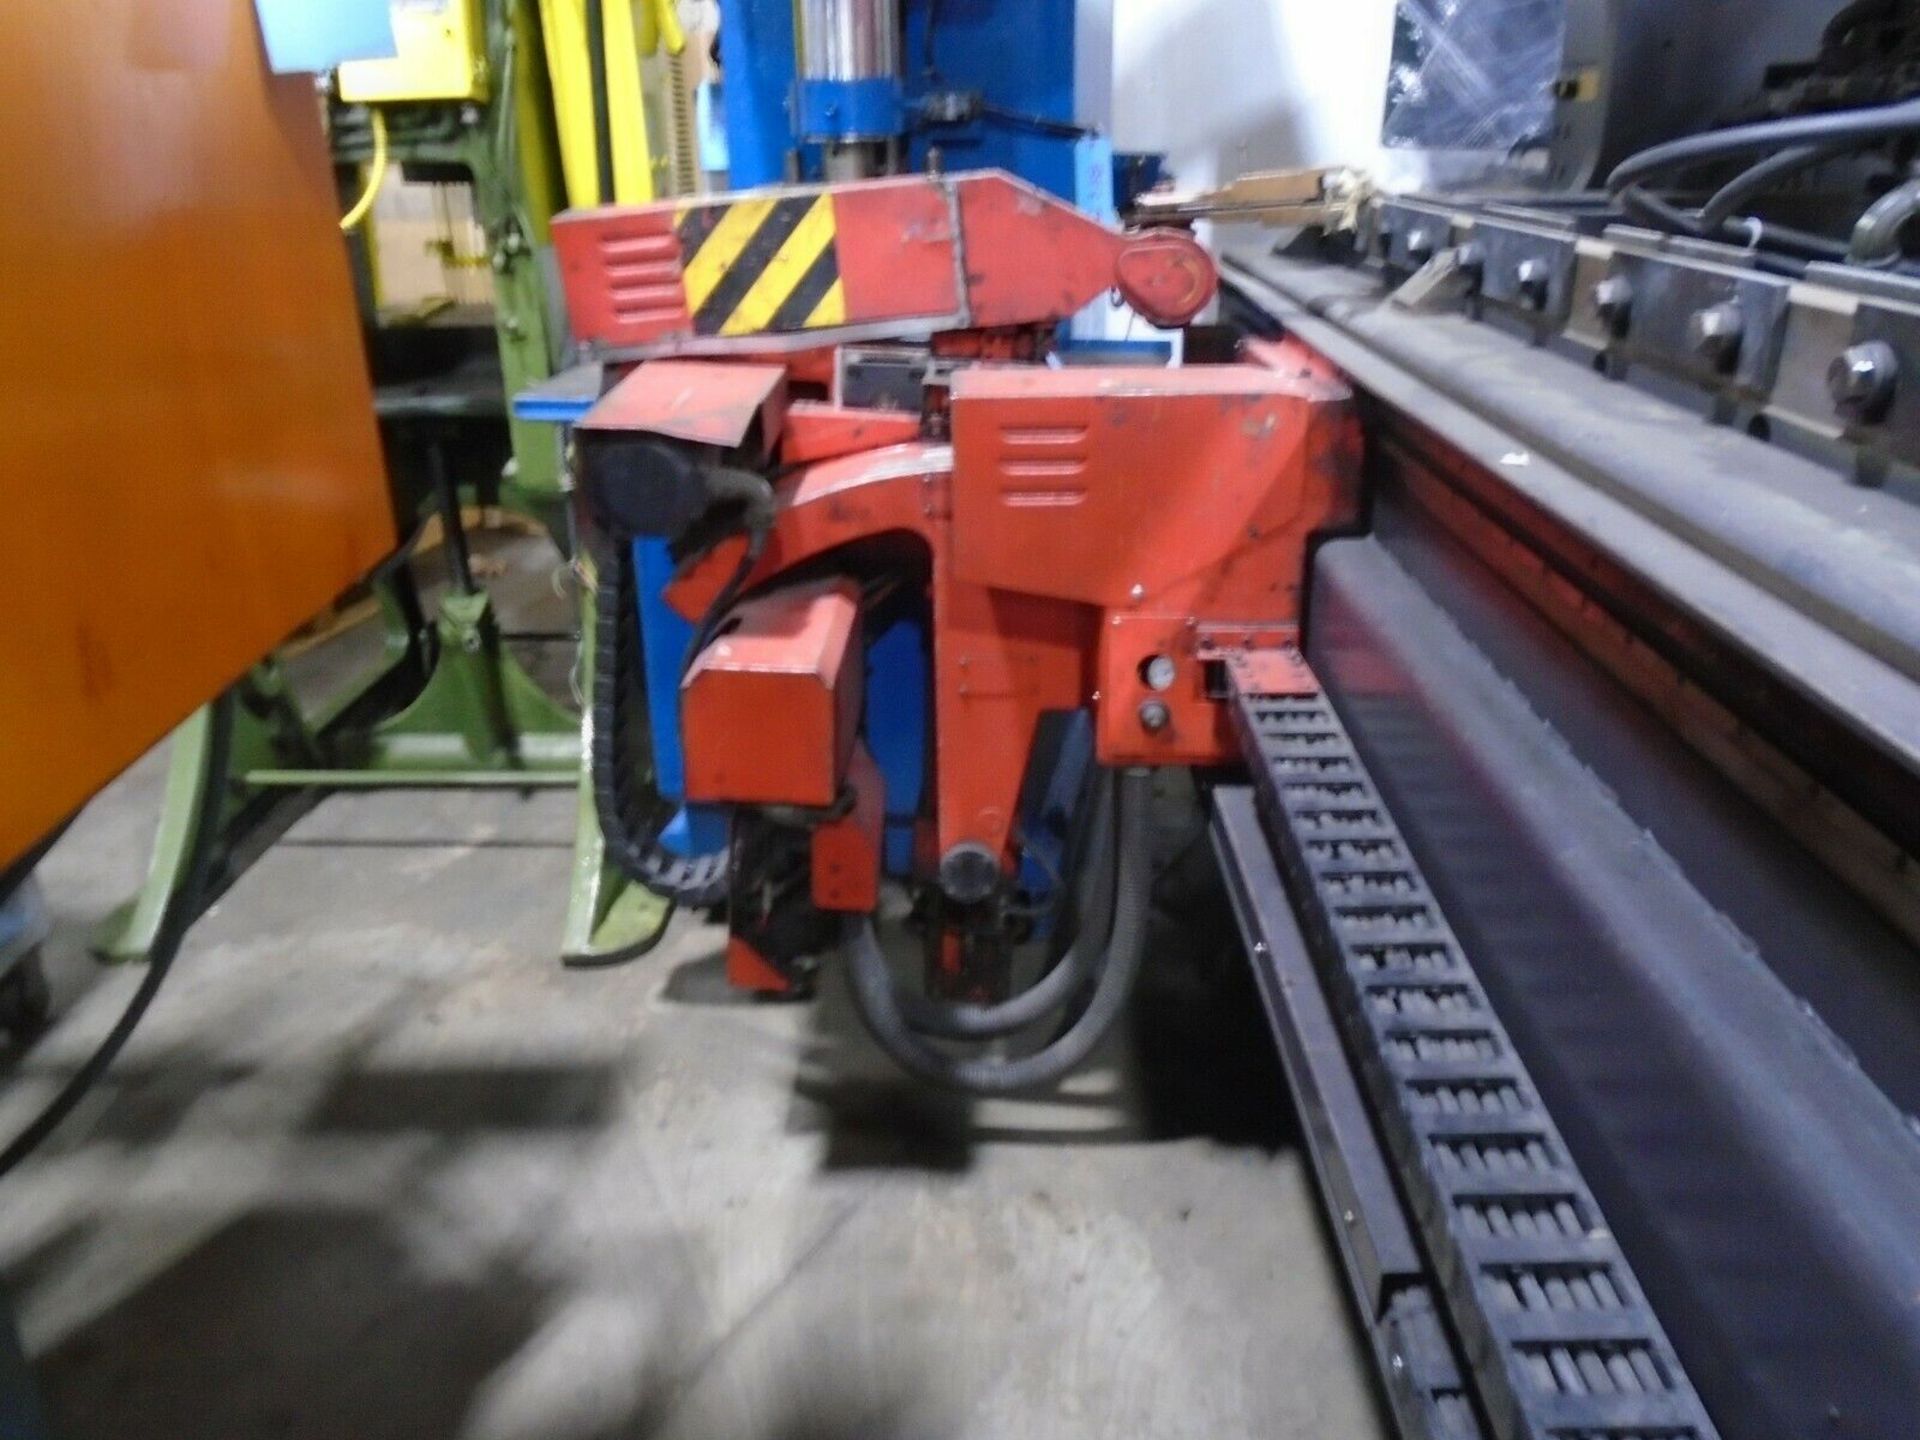 Amada Astro FBD 1253 MH CNC Press Brake Bending Cell 125 Tons x 10’ Year 1997 - Image 4 of 12